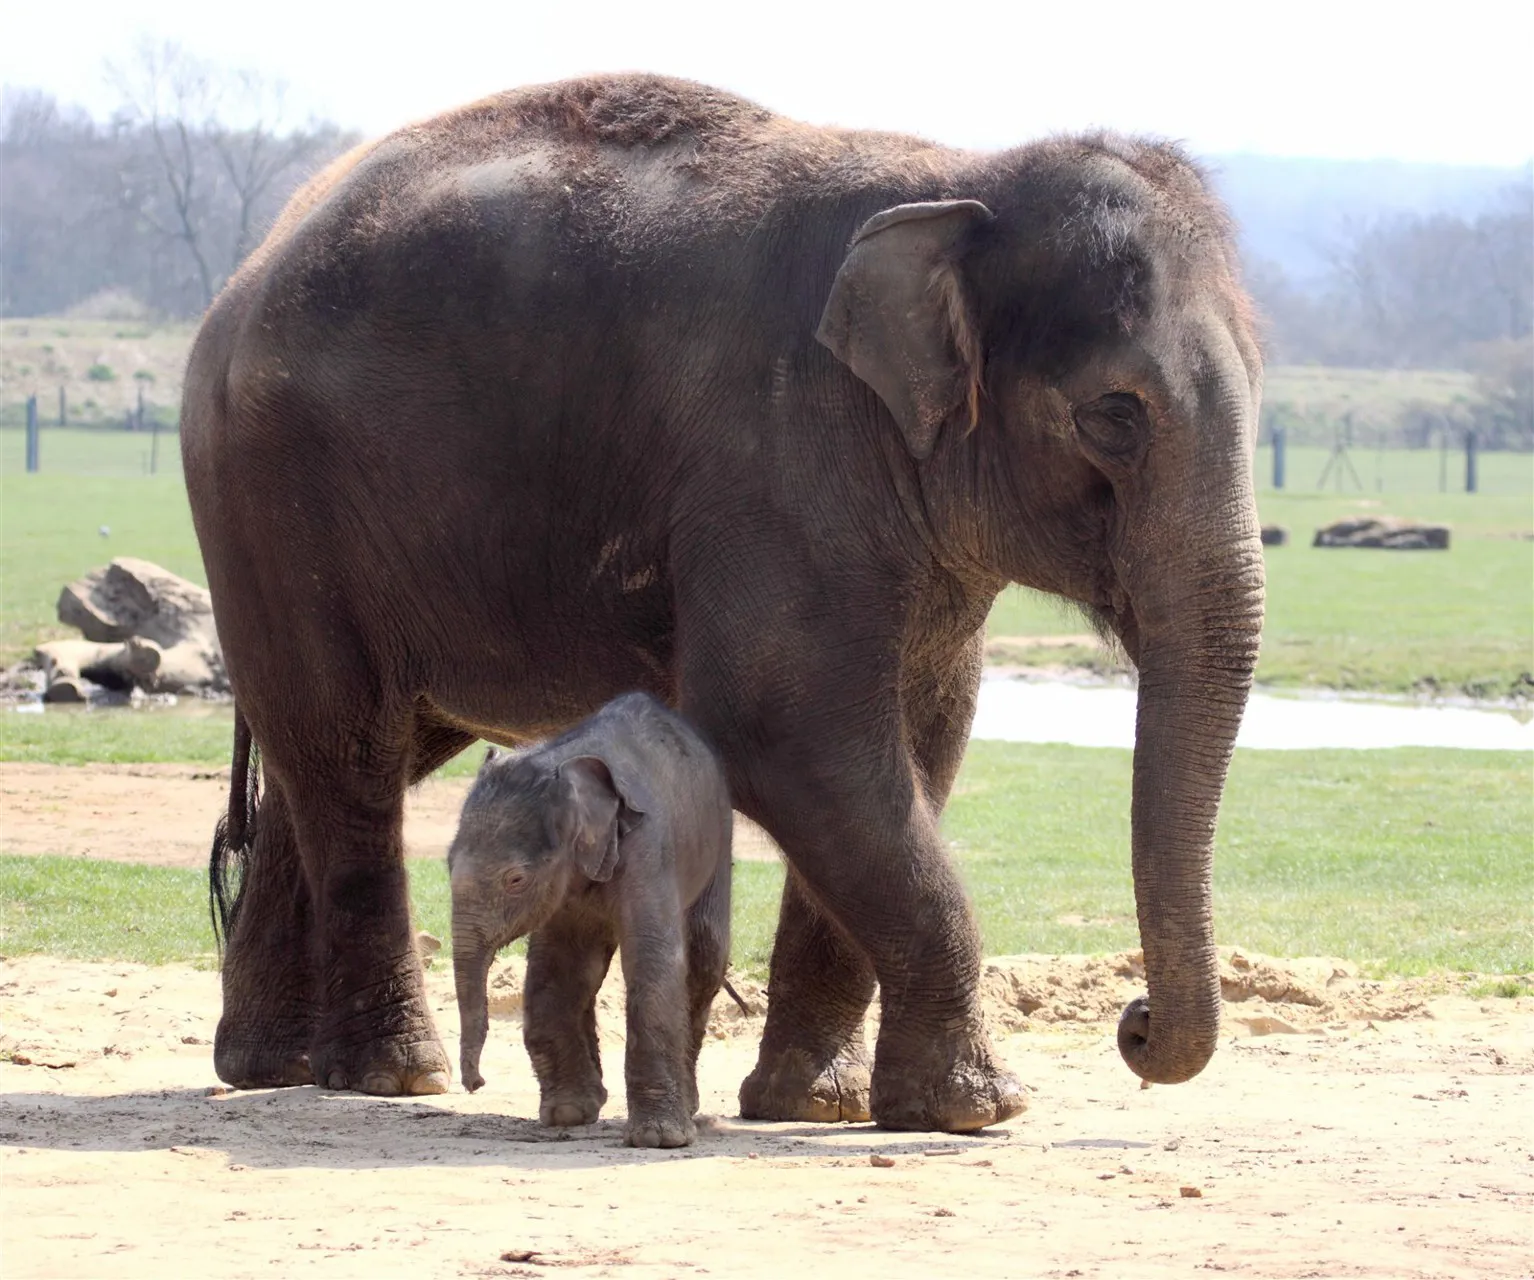 Newborn Elephant at the Whipsnade Zoo